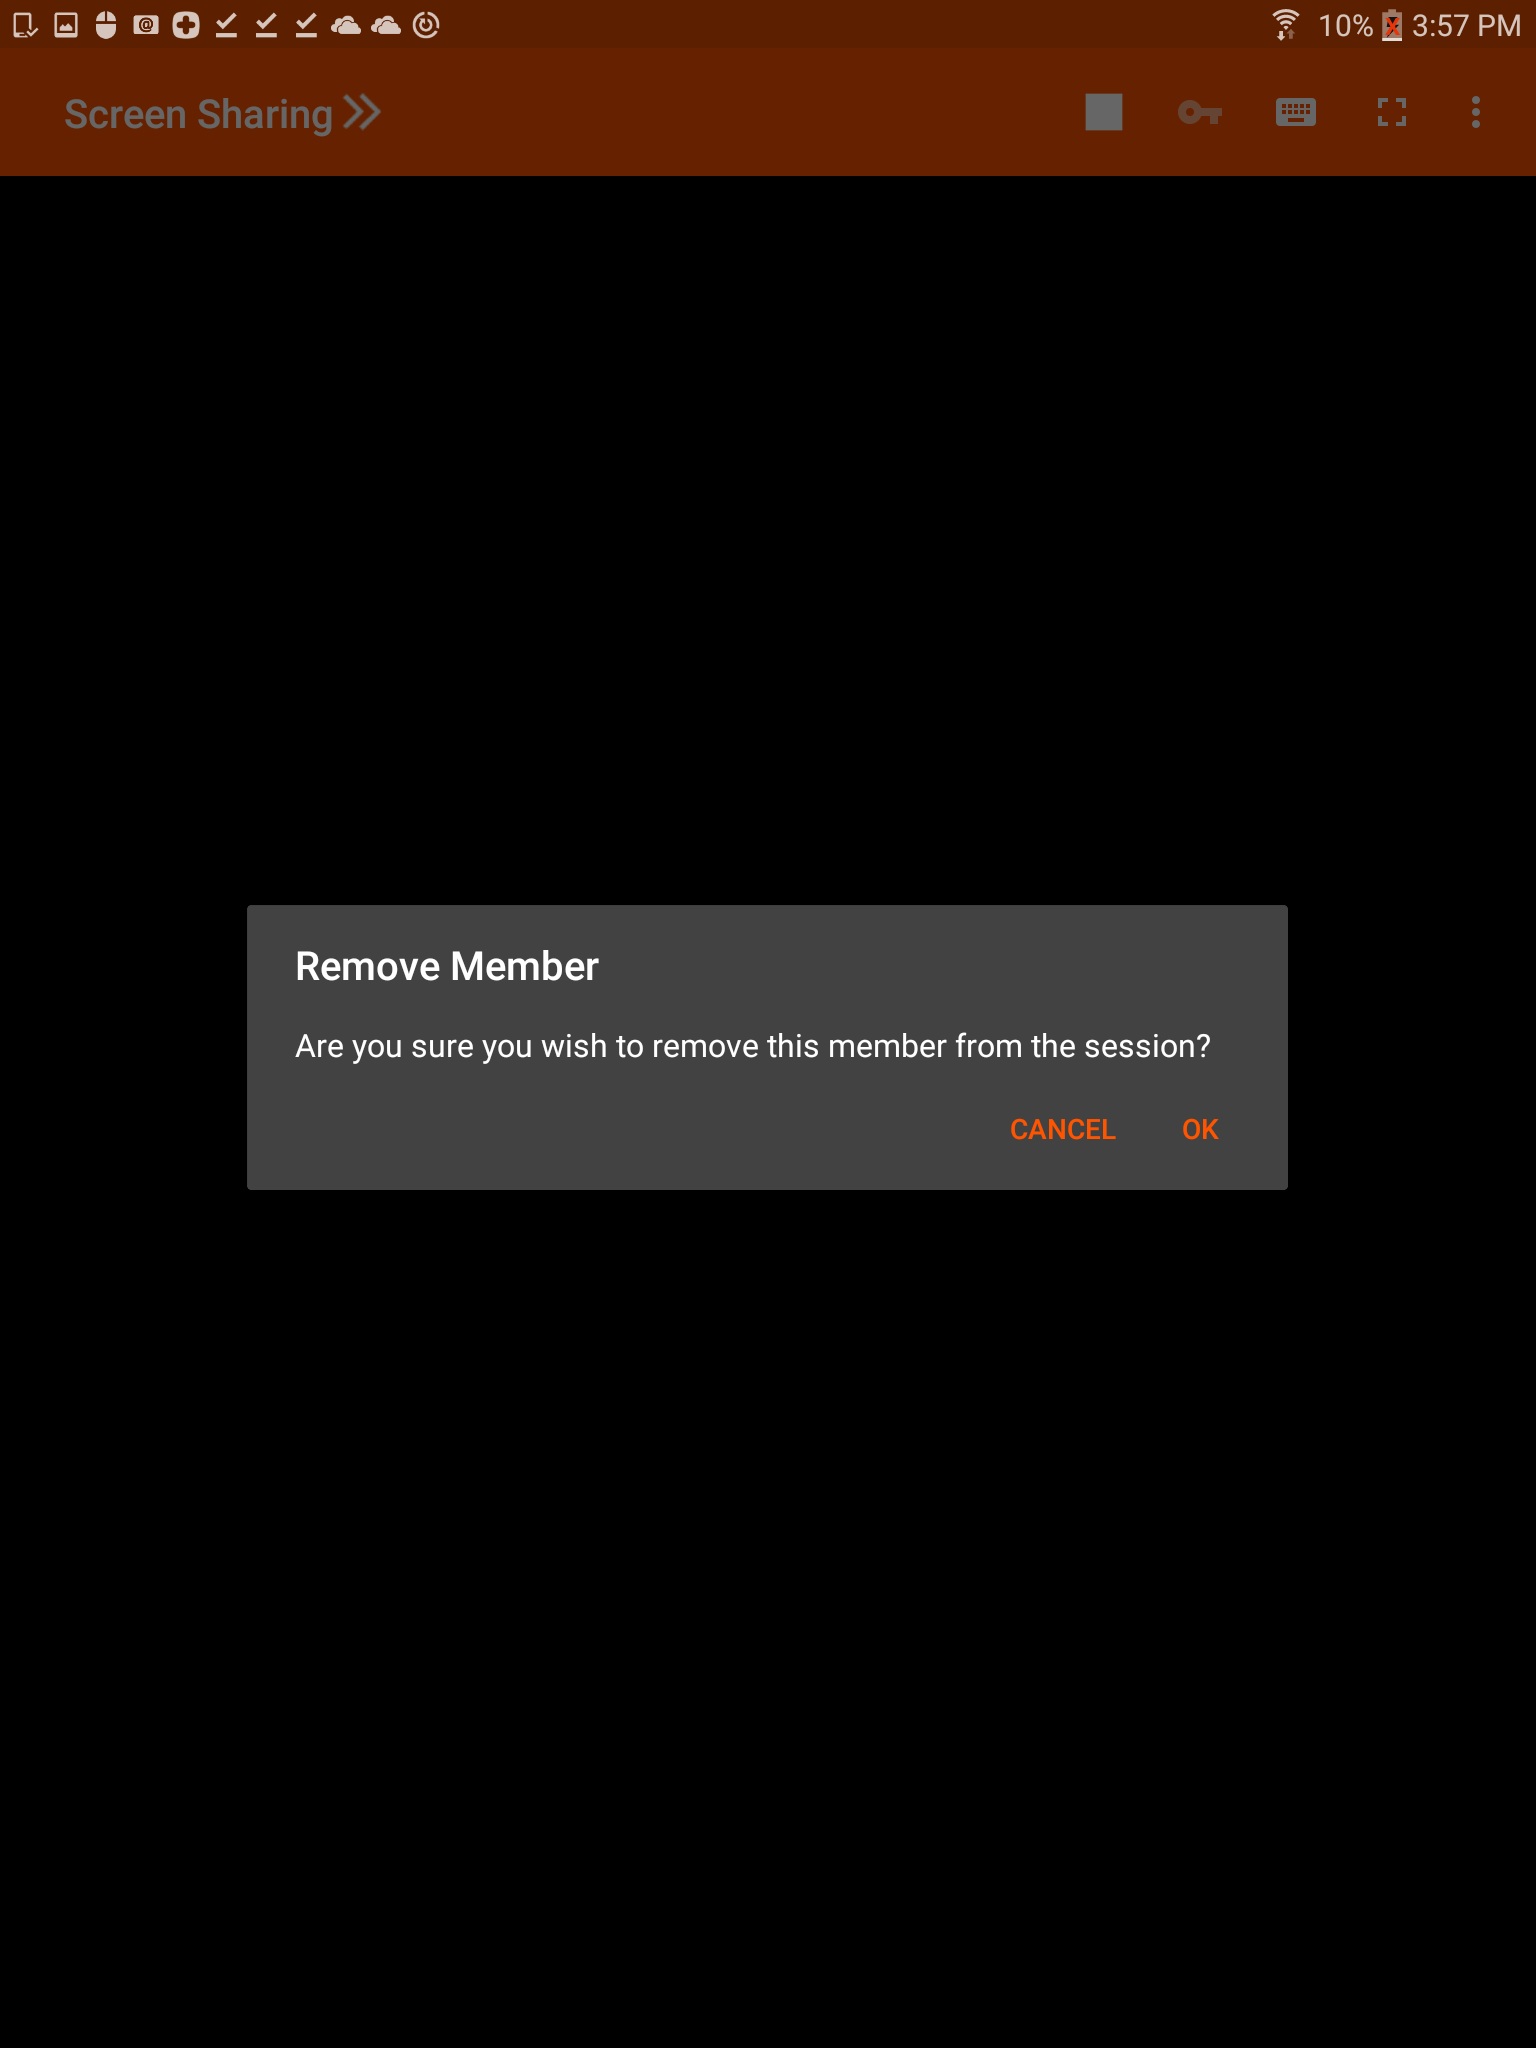 Member Removal Confirmation Prompt